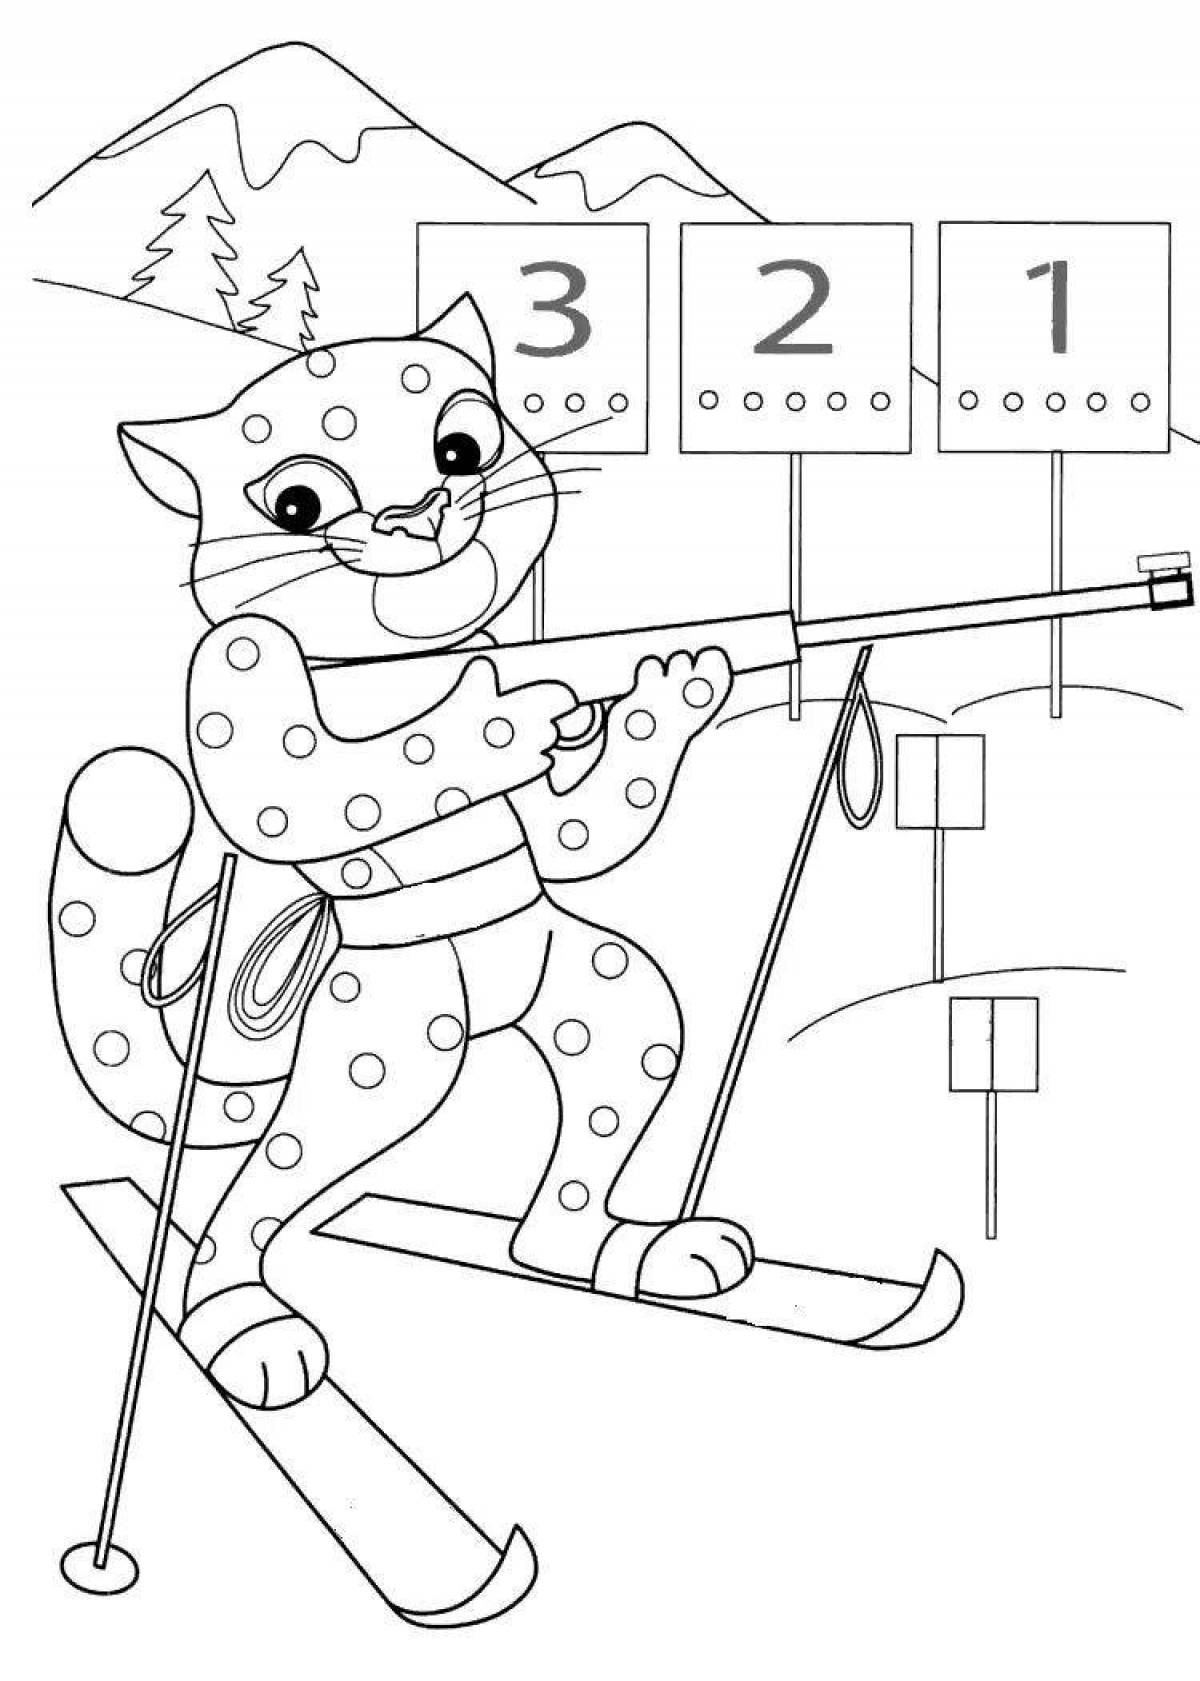 Fun coloring book for children's olympic sports